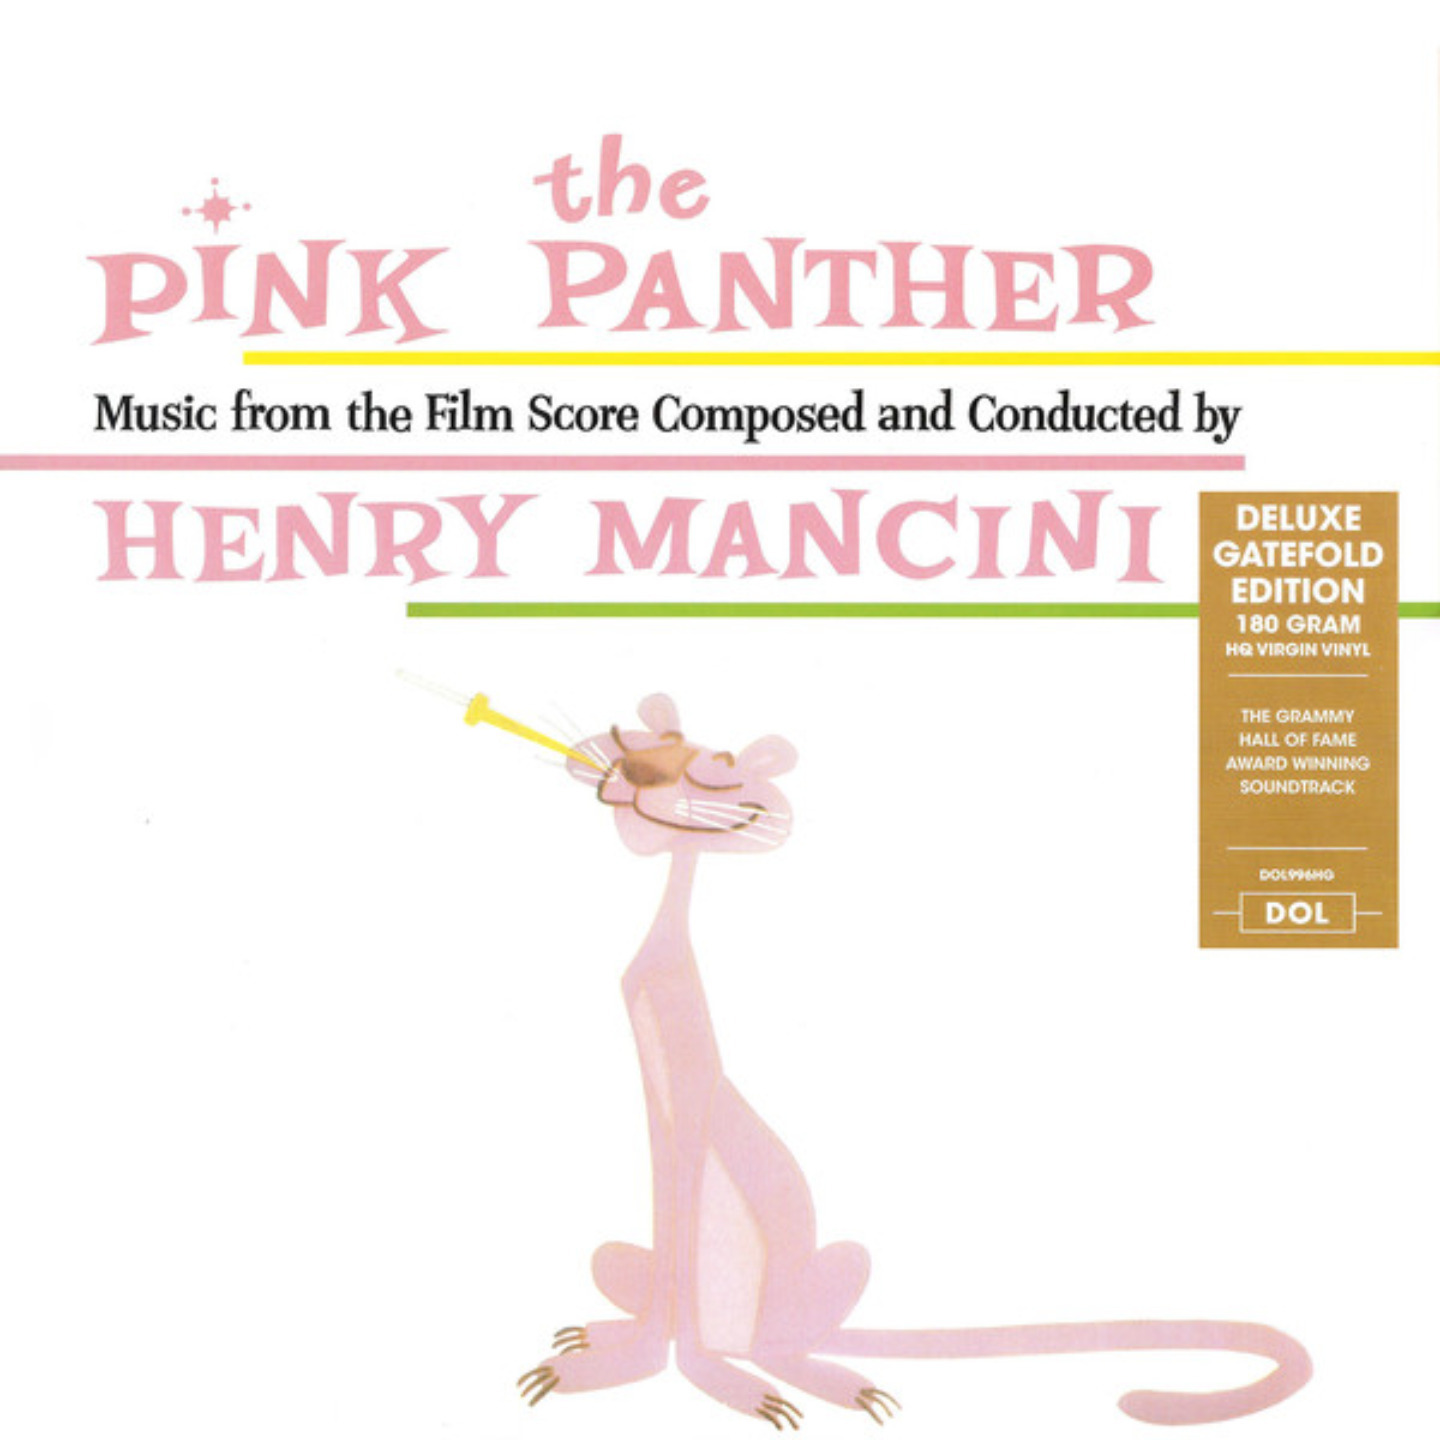 HENRY MANCINI - The Pink Panther Music From The Film Score LP 180g Virgin Vinyl